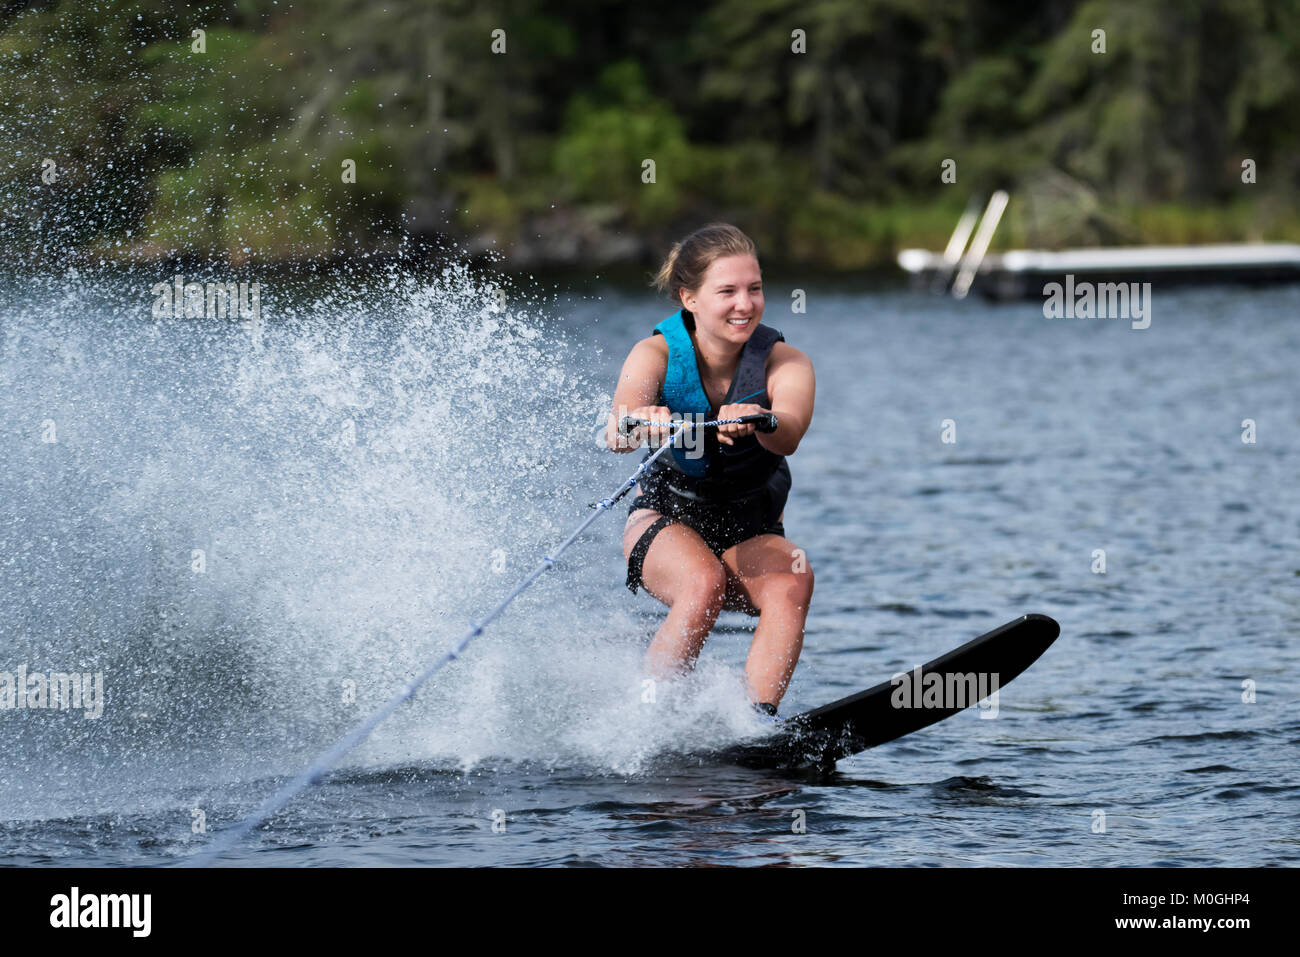 A young woman wakeboarding behind a boat on a lake; Lake of the Woods, Ontario, Canada Stock Photo